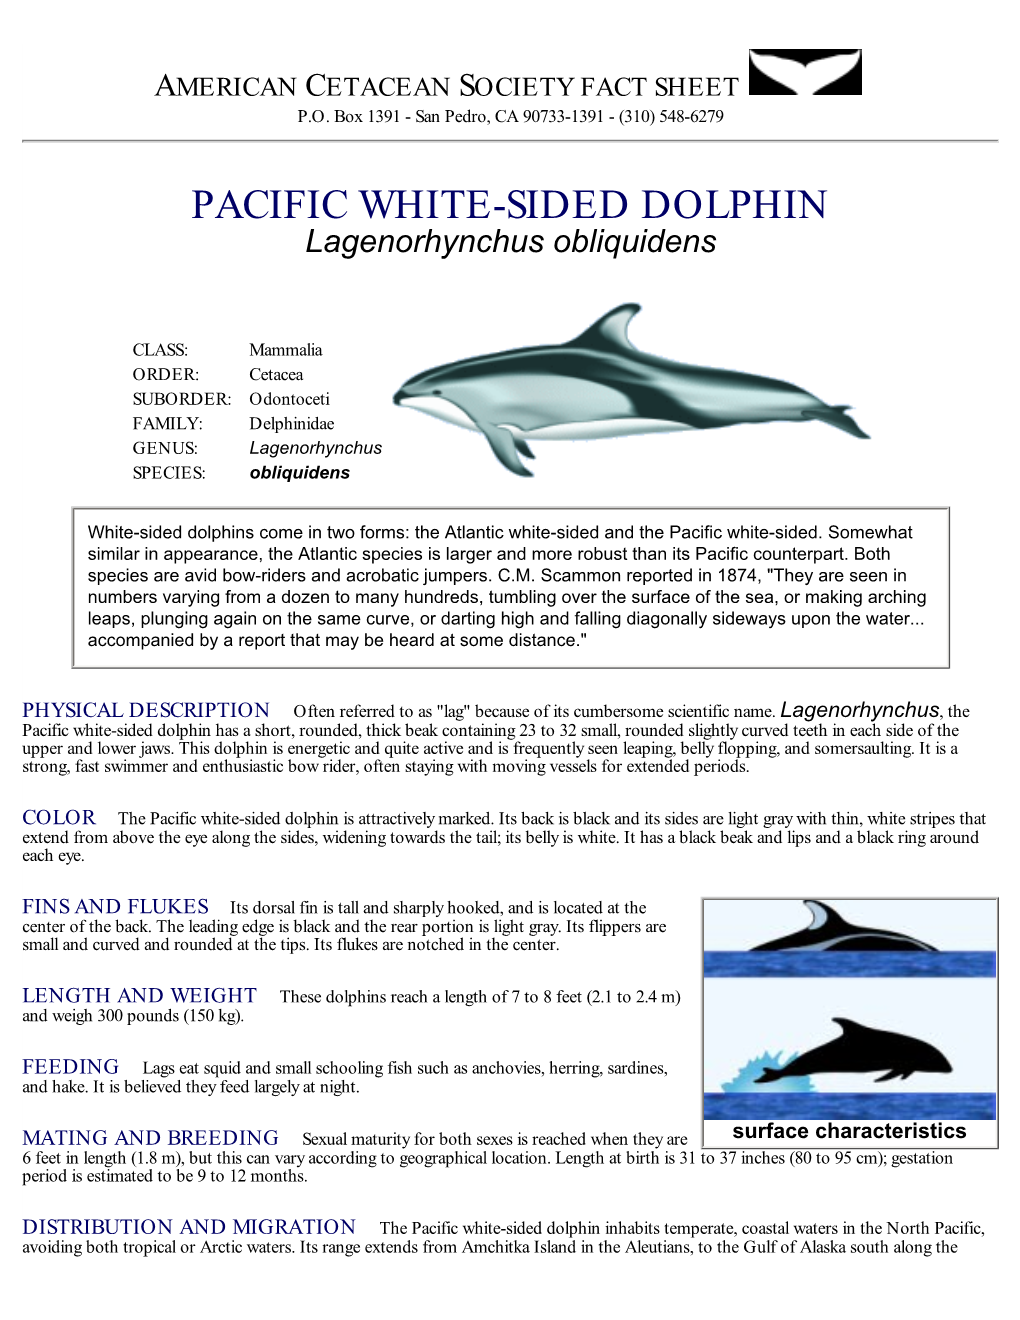 PACIFIC WHITE-SIDED DOLPHIN Lagenorhynchus Obliquidens